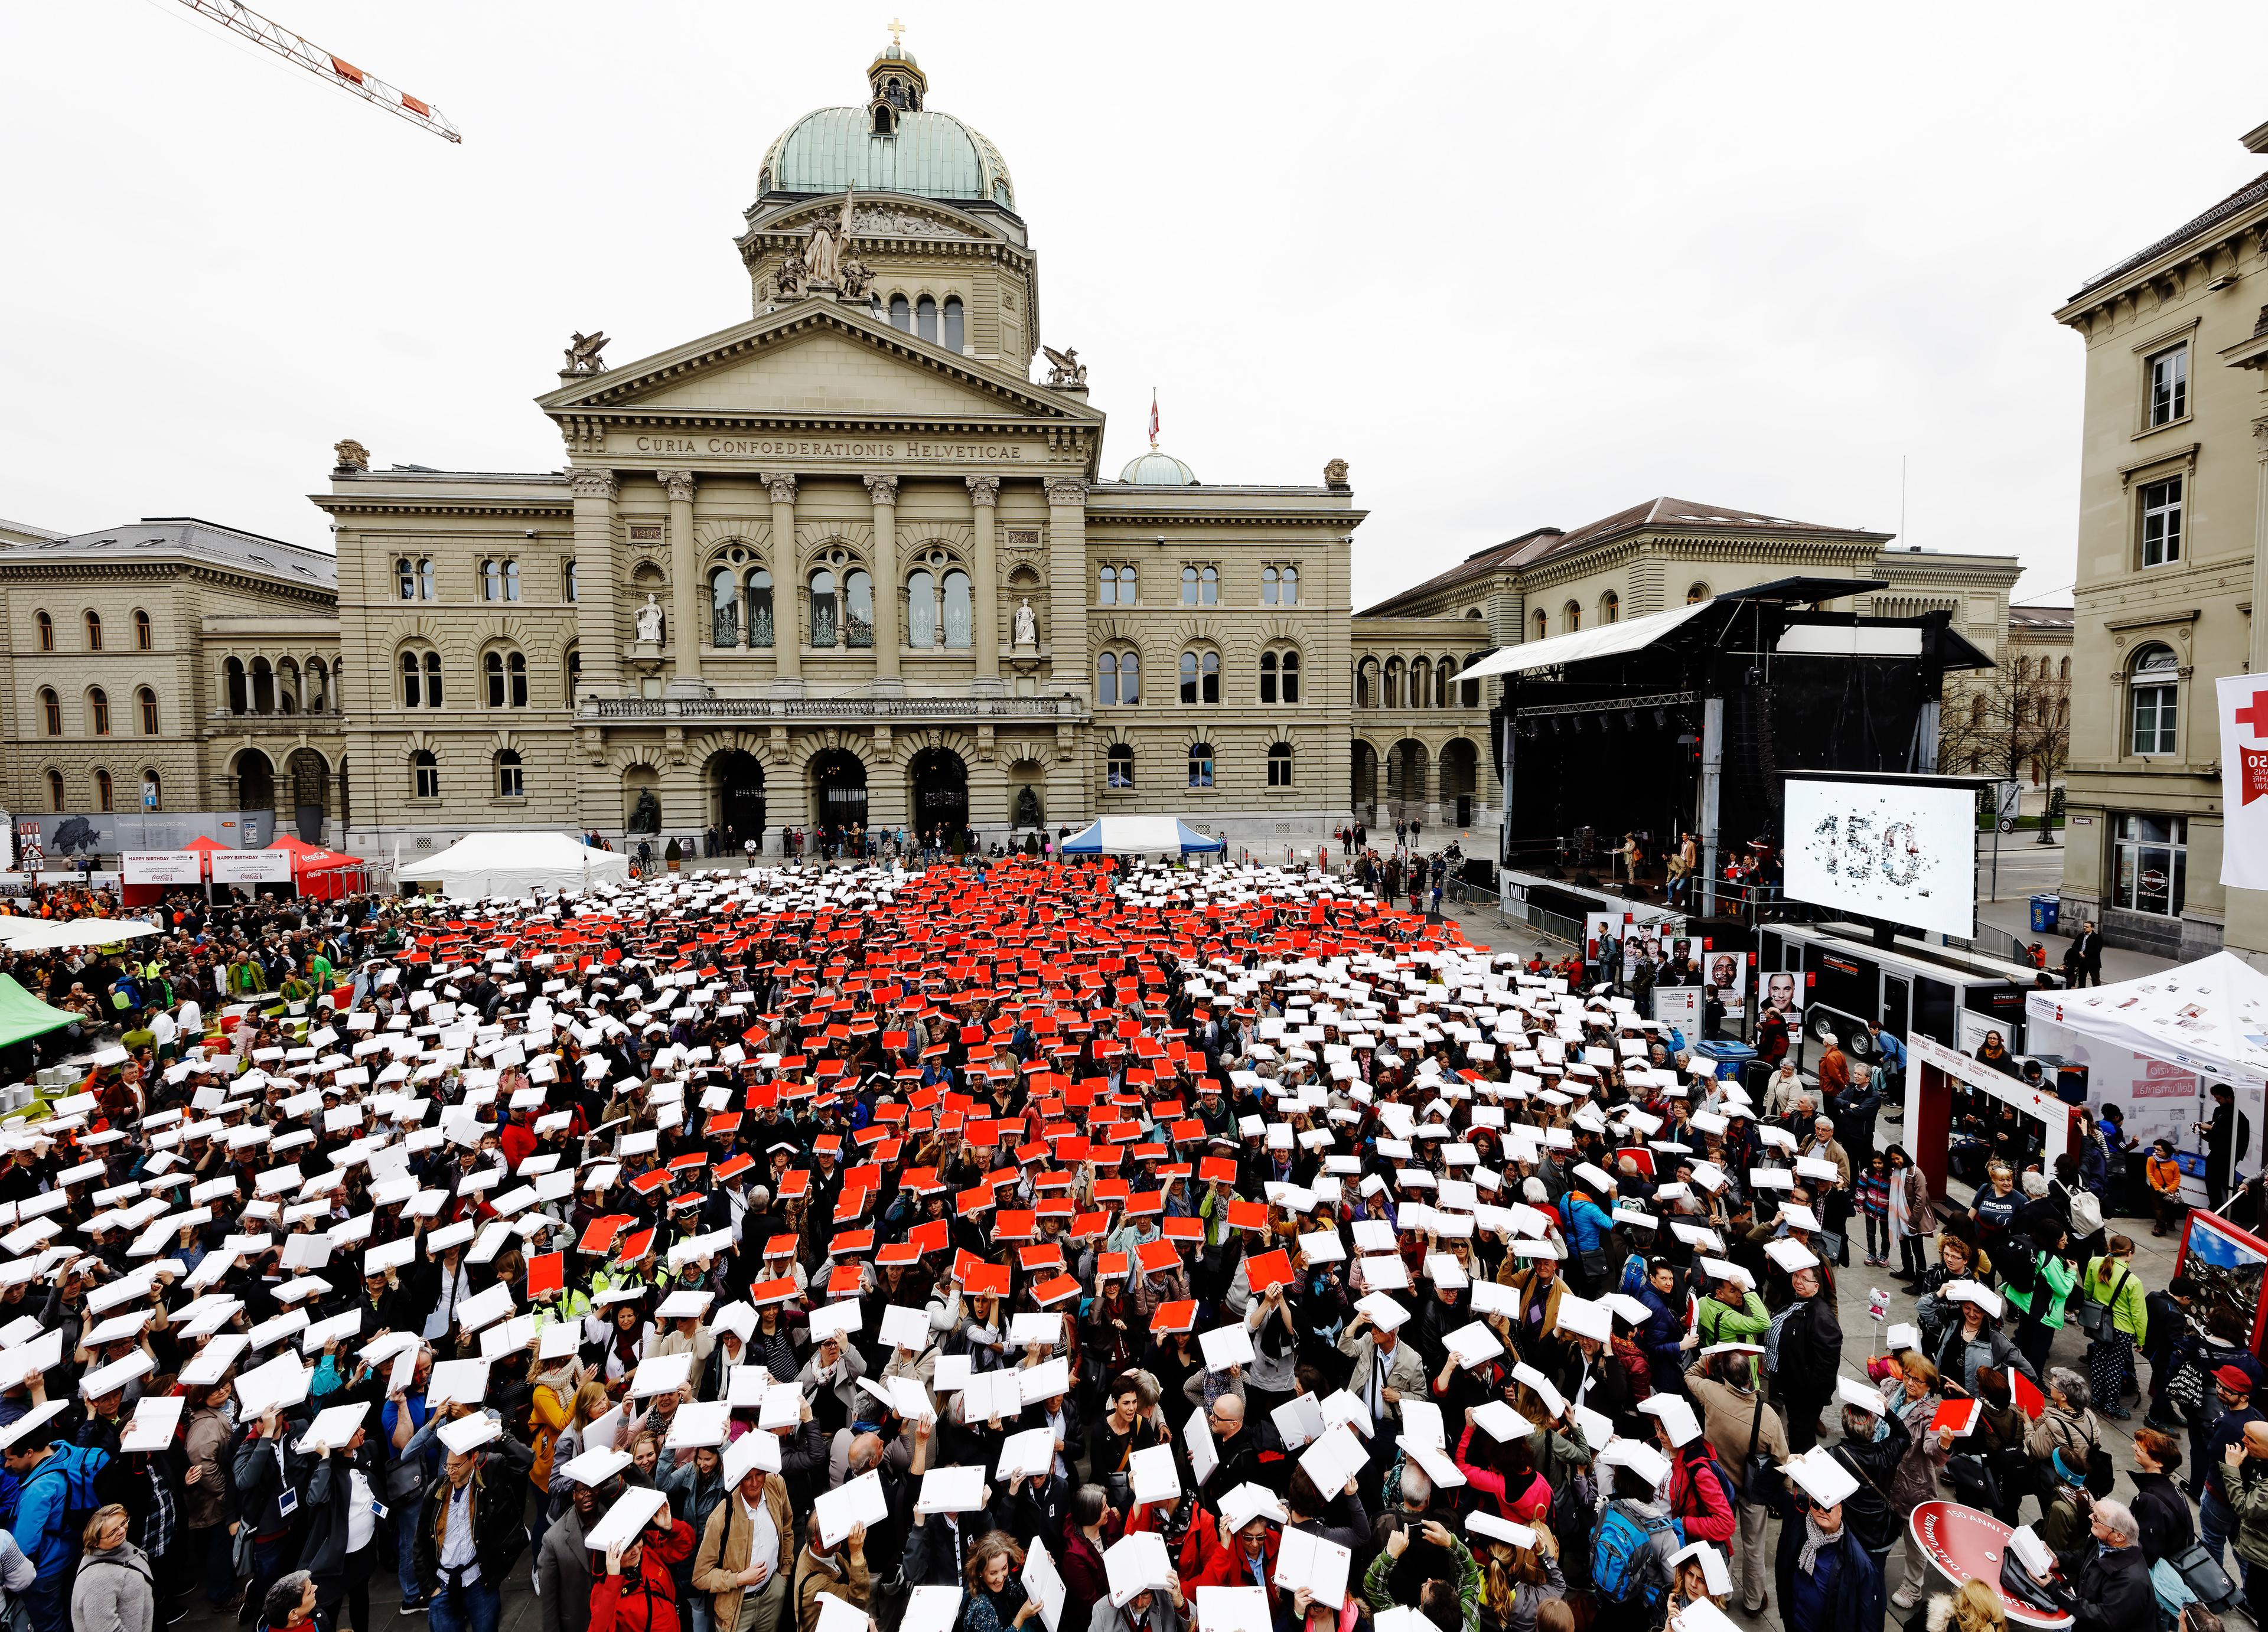 Several thousand people form a large Red Cross on a white background with red and white leaves on Bern's Bundesplatz.